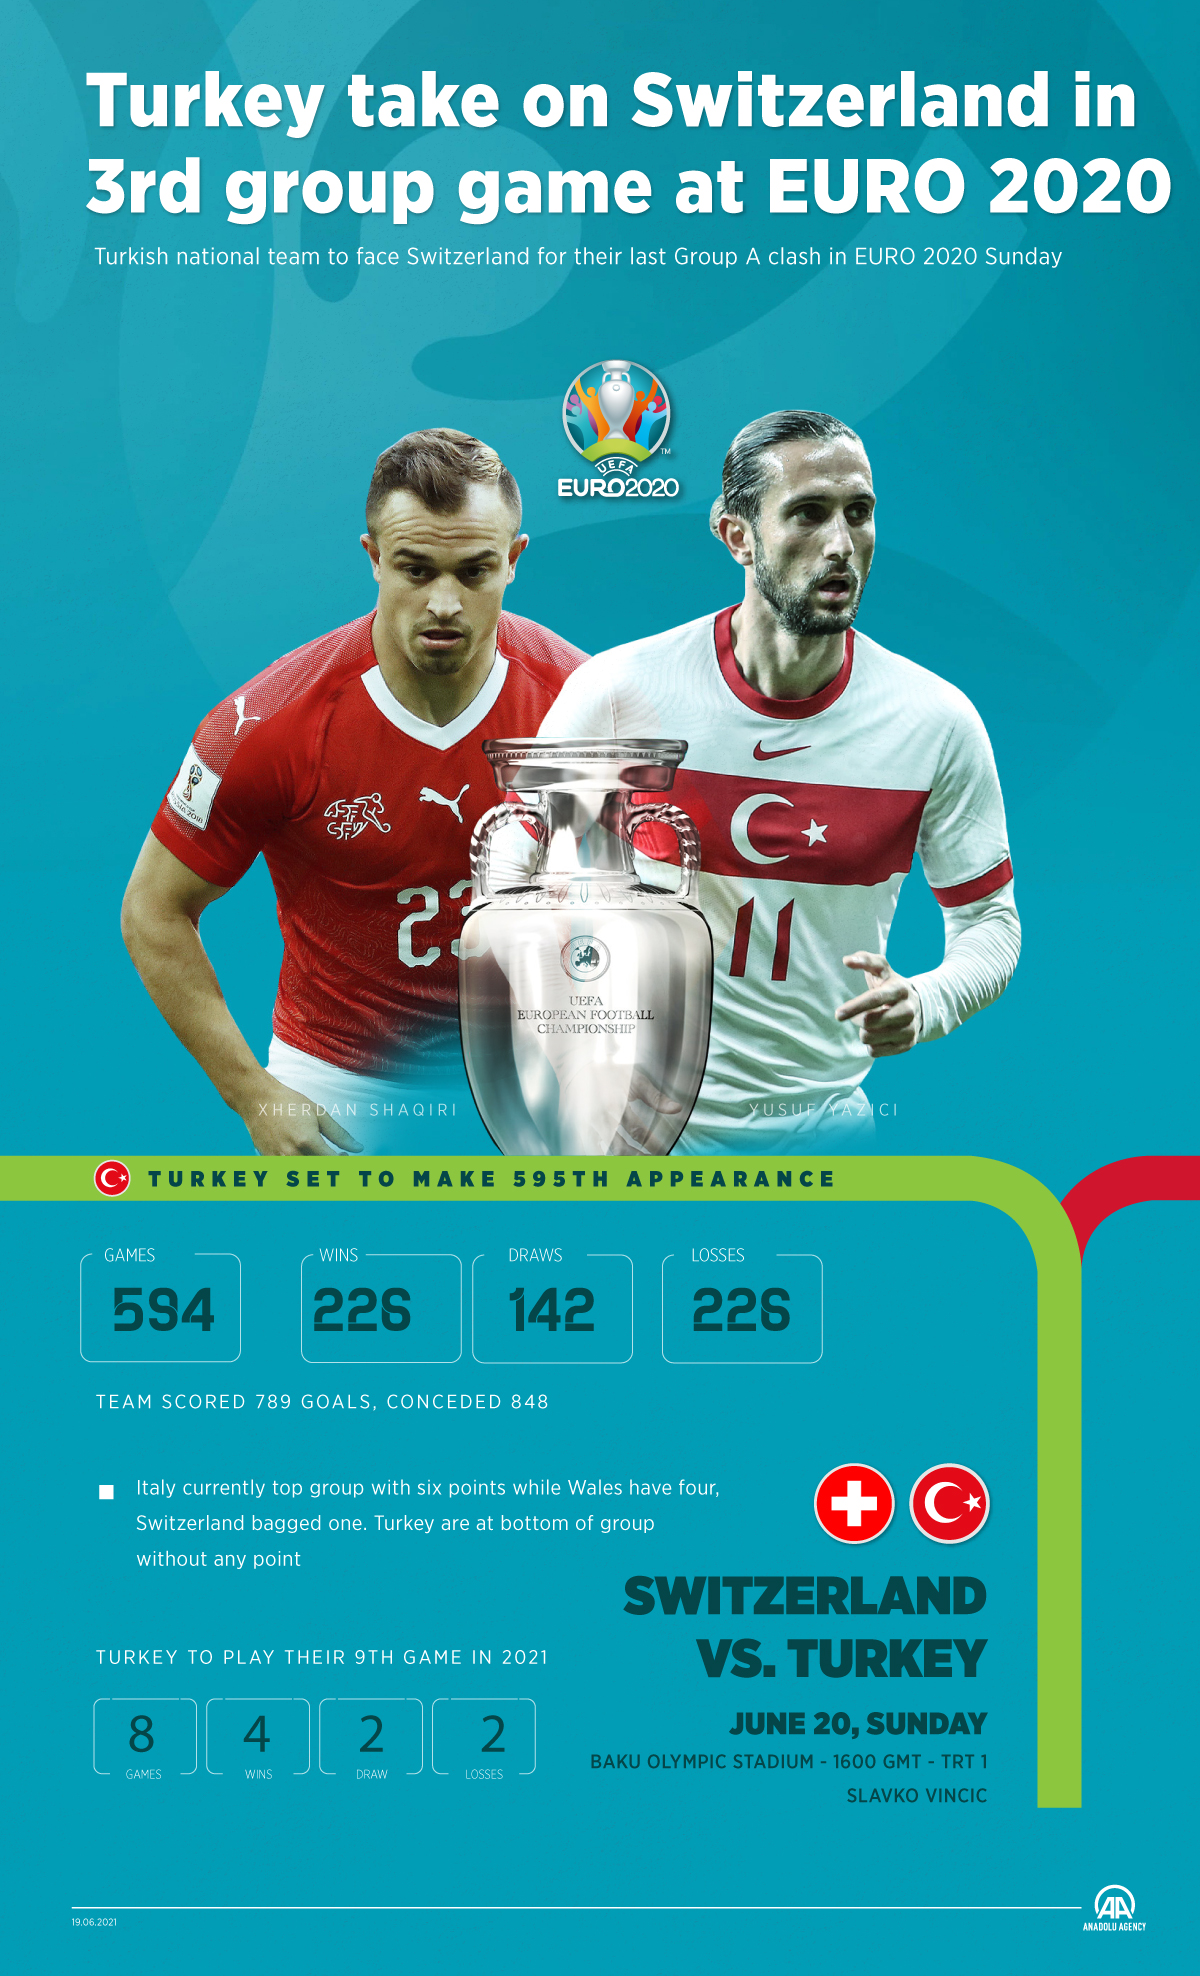 Turkish national team to face Switzerland for their last Group A clash in EURO 2020 Sunday